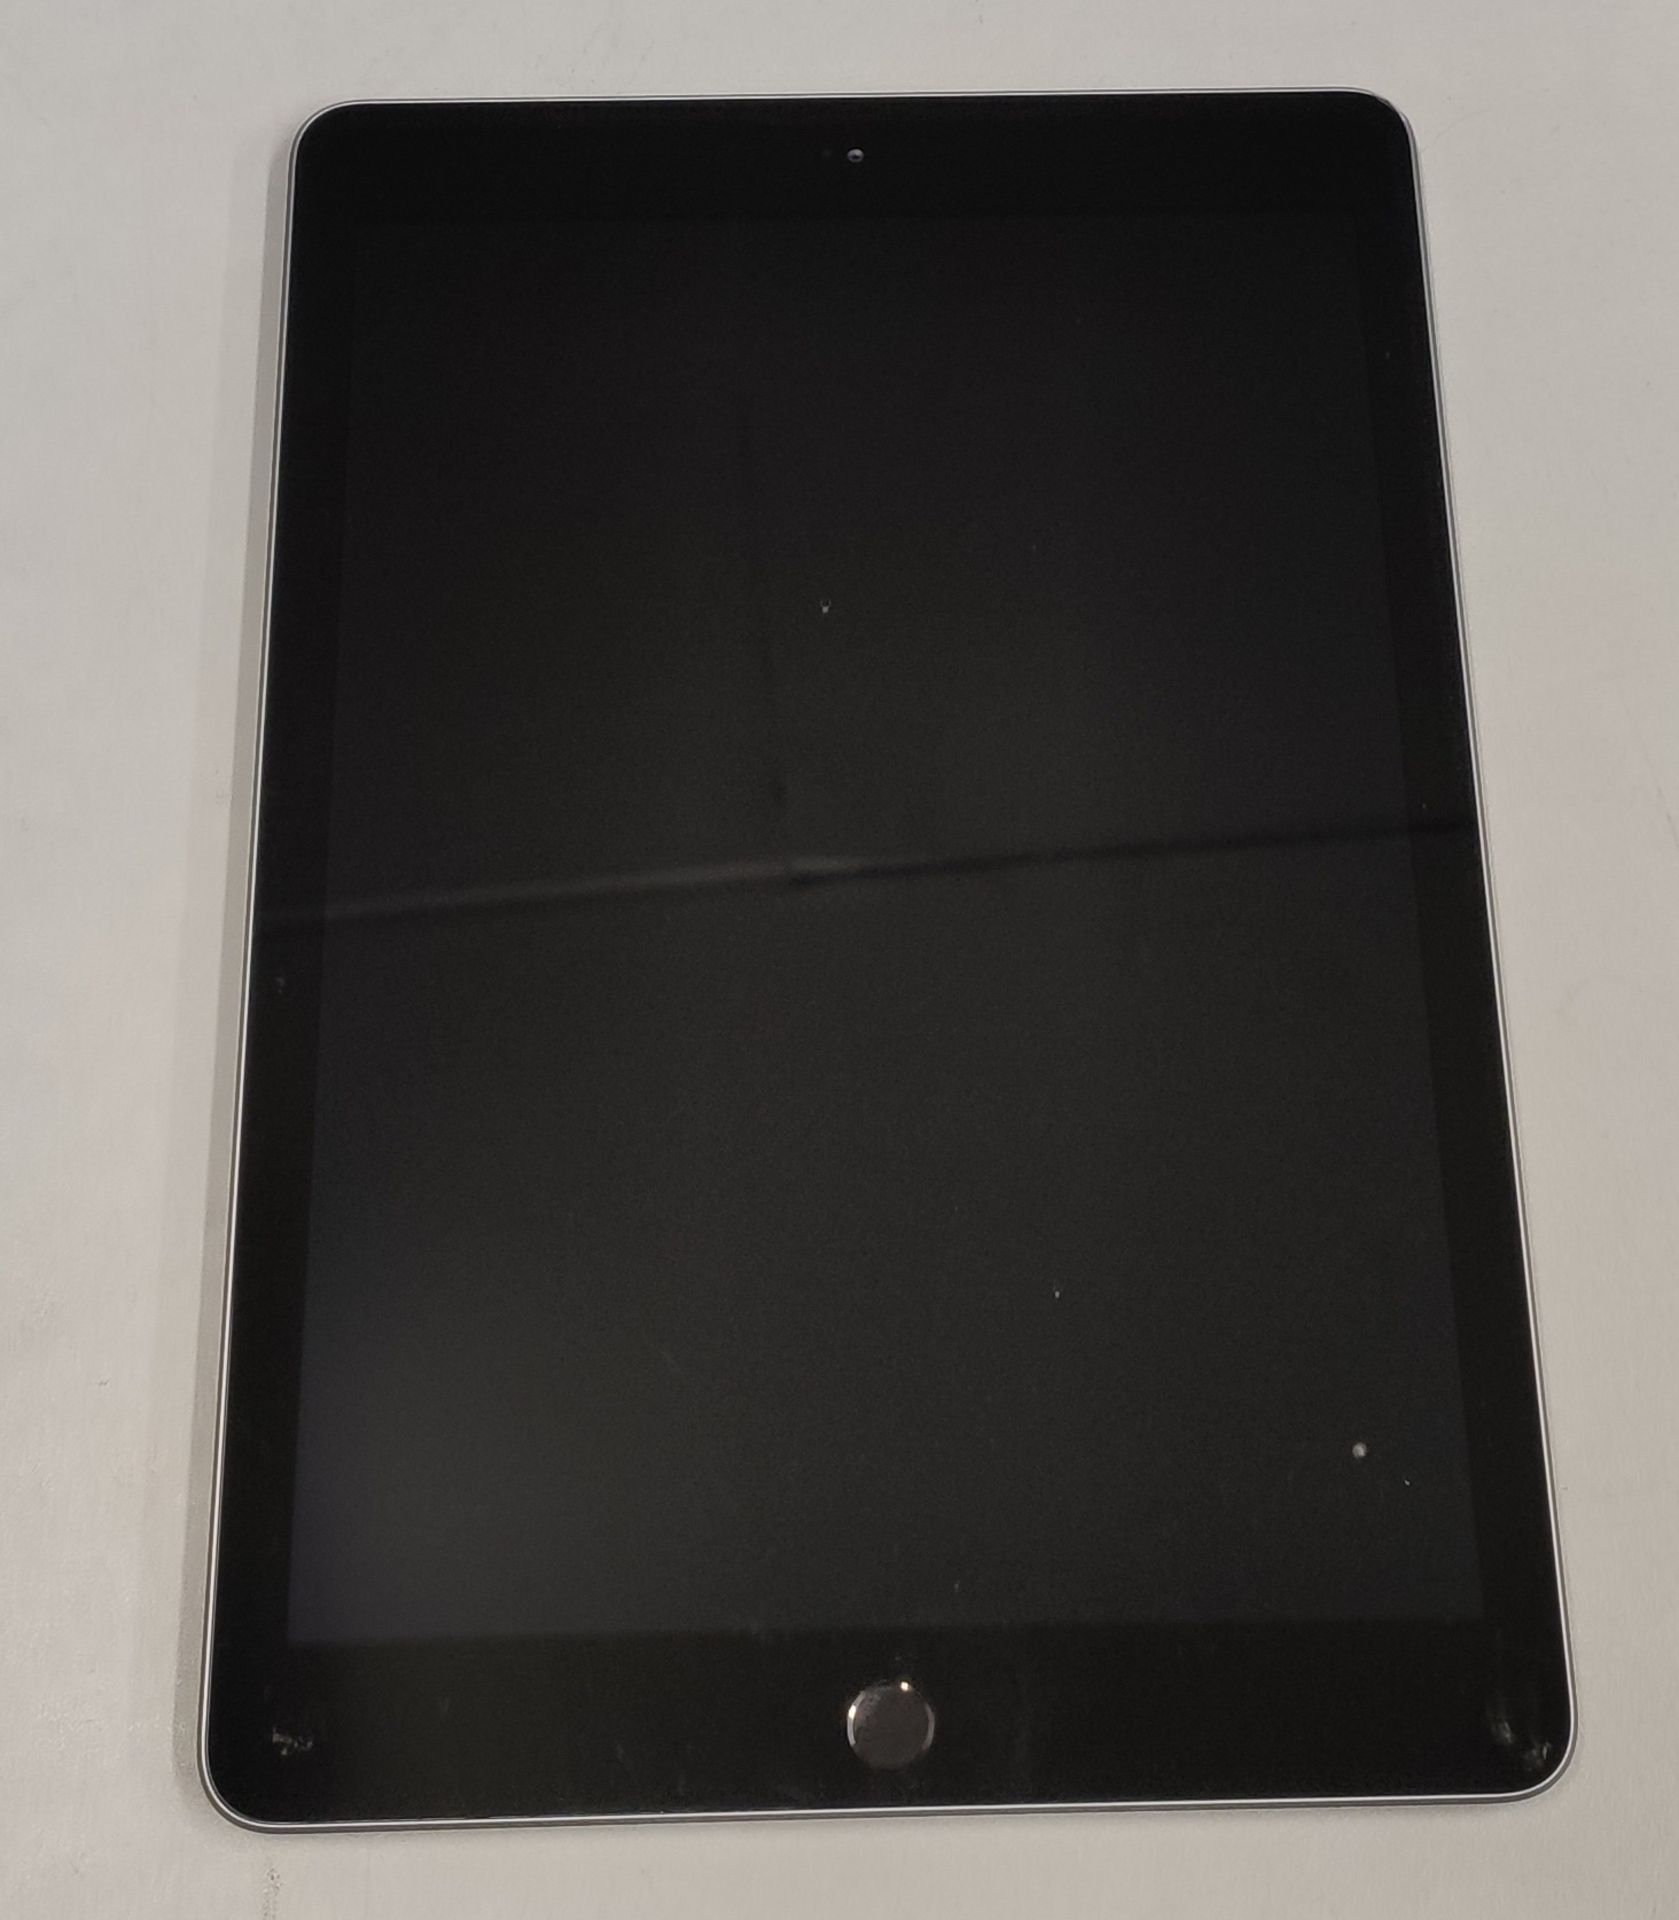 A pre-owned Apple iPad 9.7" 6th Gen (Wi-Fi Only) 128GB in Space Grey (Serial: FPLYD07LJF8M) (